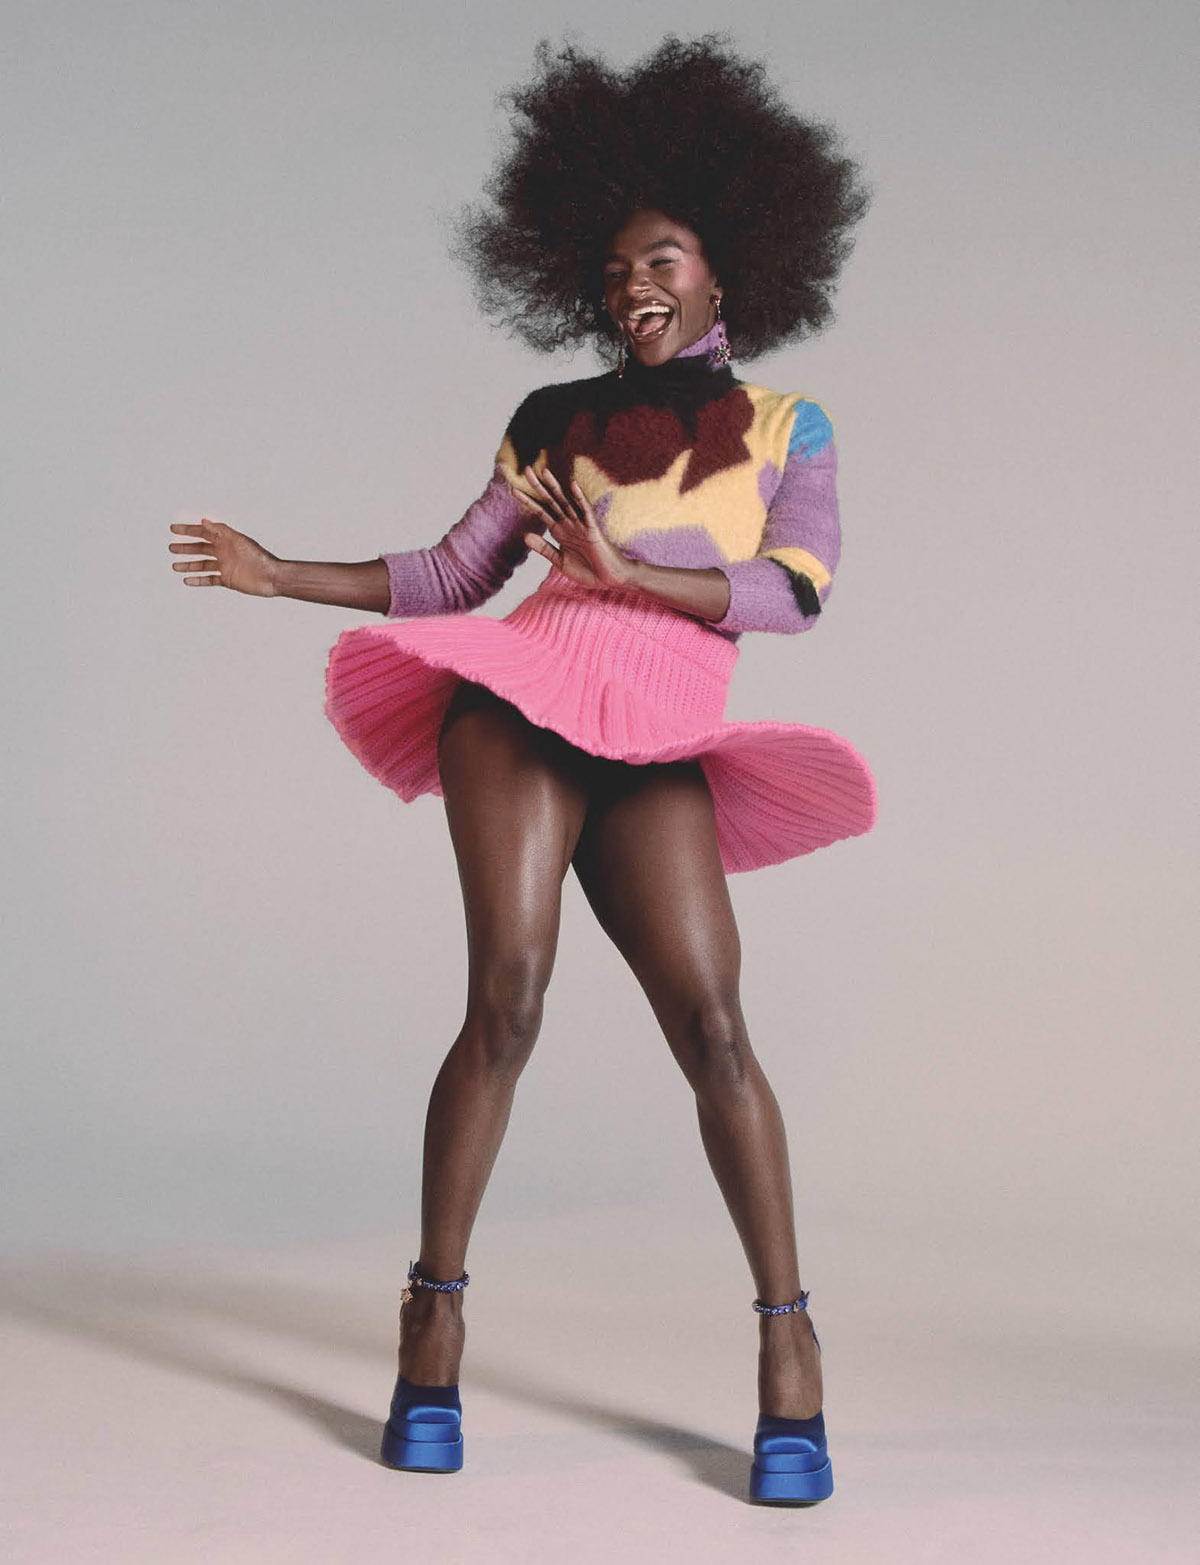 Dina Asher-Smith by Charlotte Wales for British Vogue August 2021